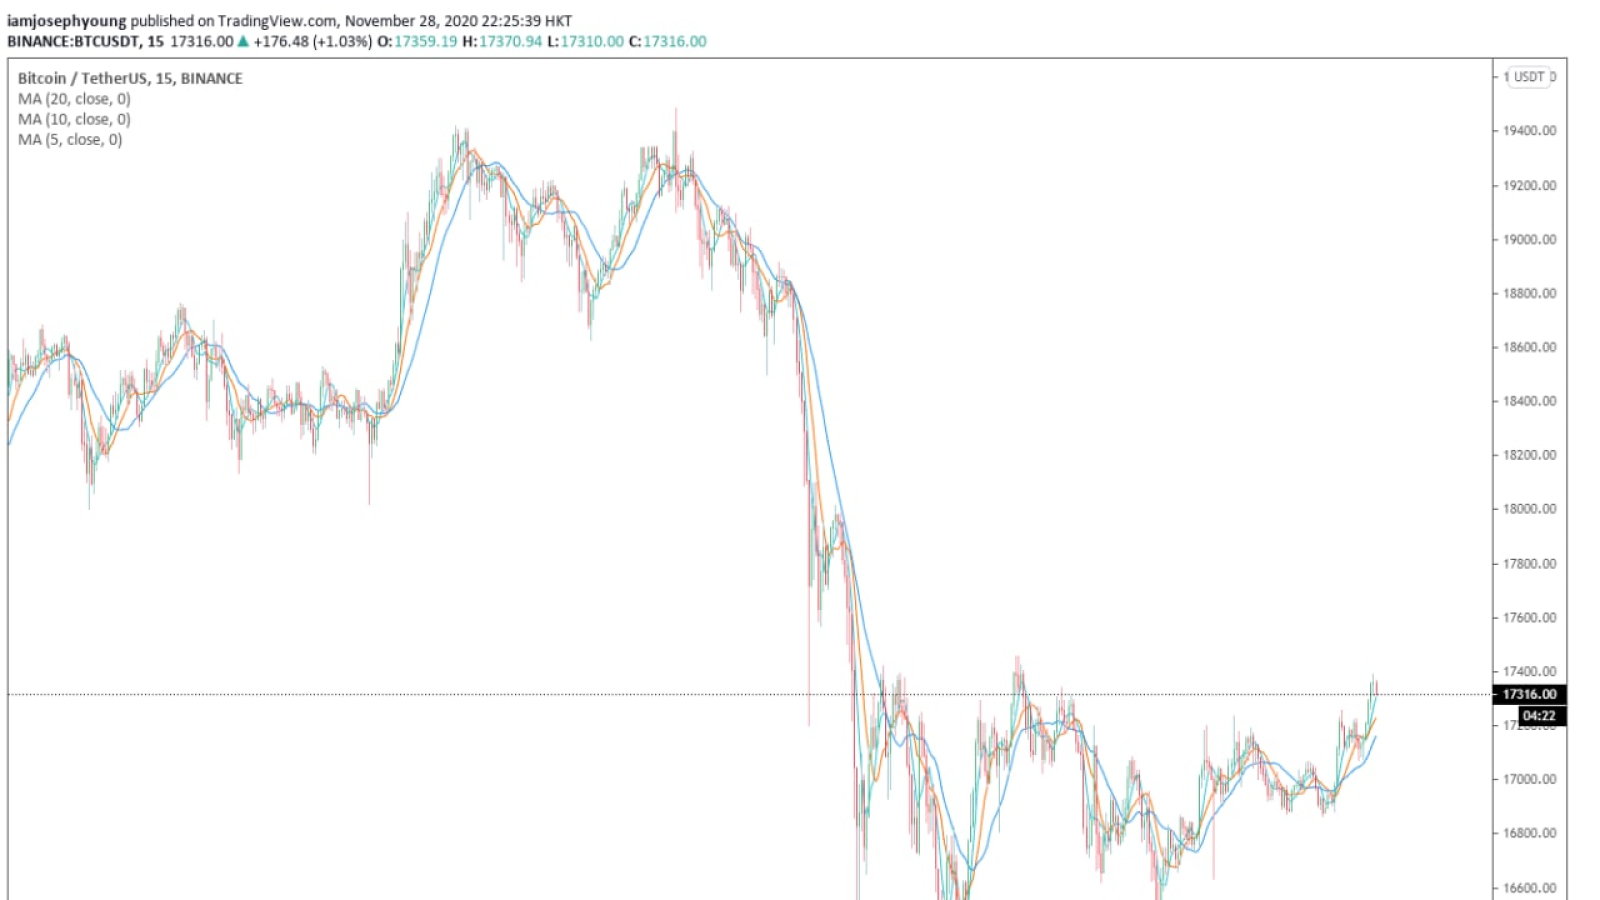 The 15-minute price chart of Bitcoin